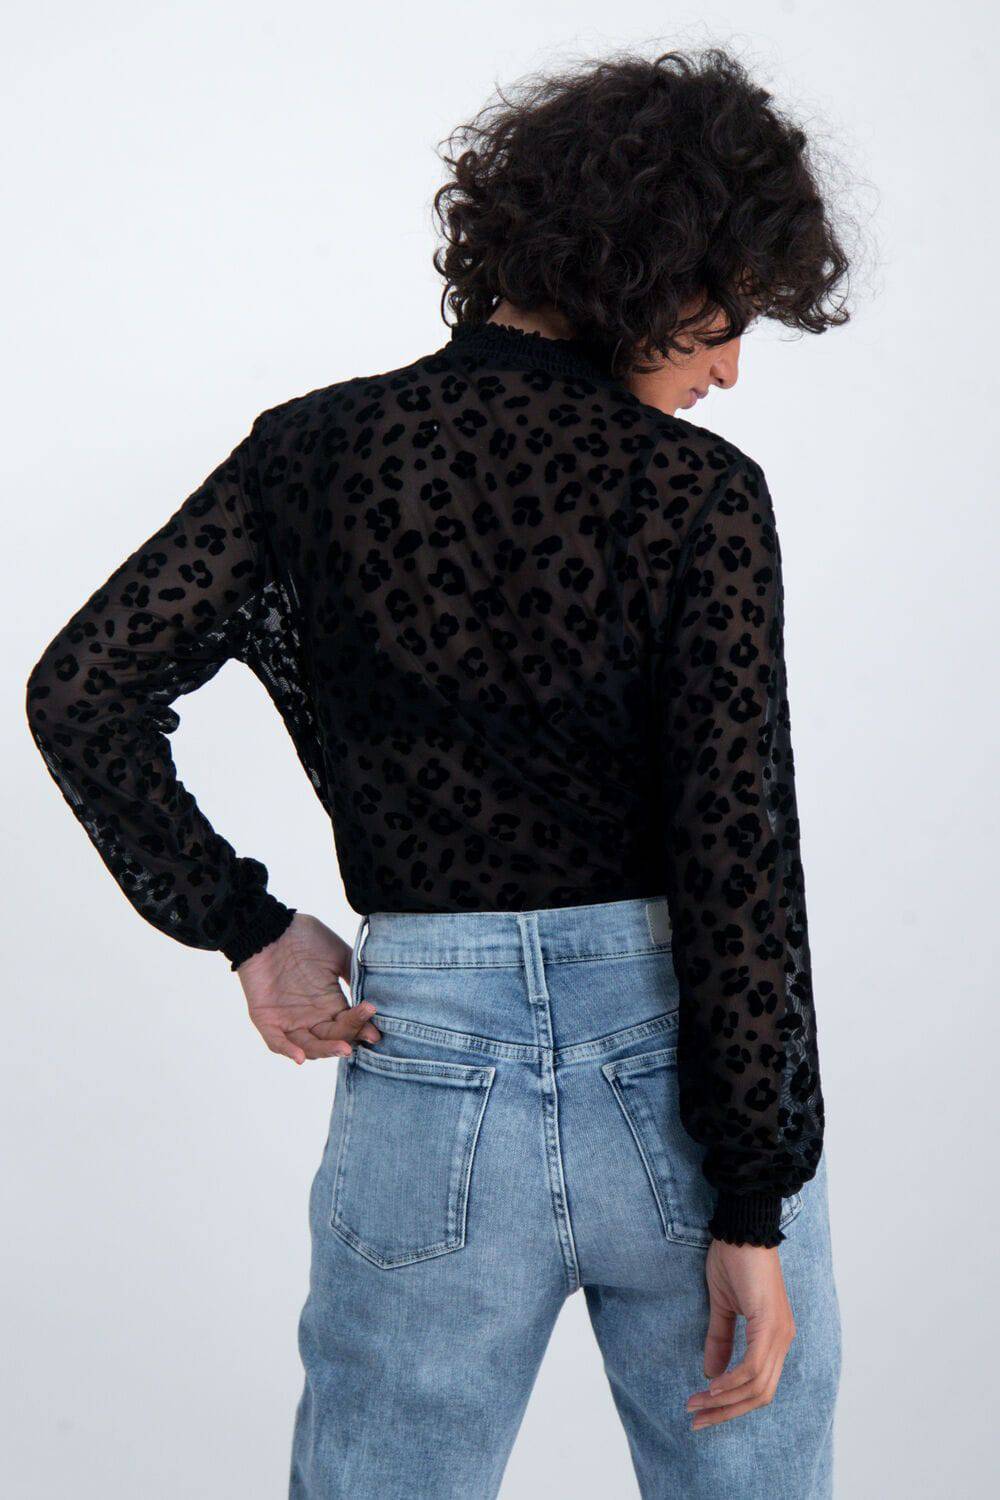 Garcia Black Mesh Top - Your Style Your Story